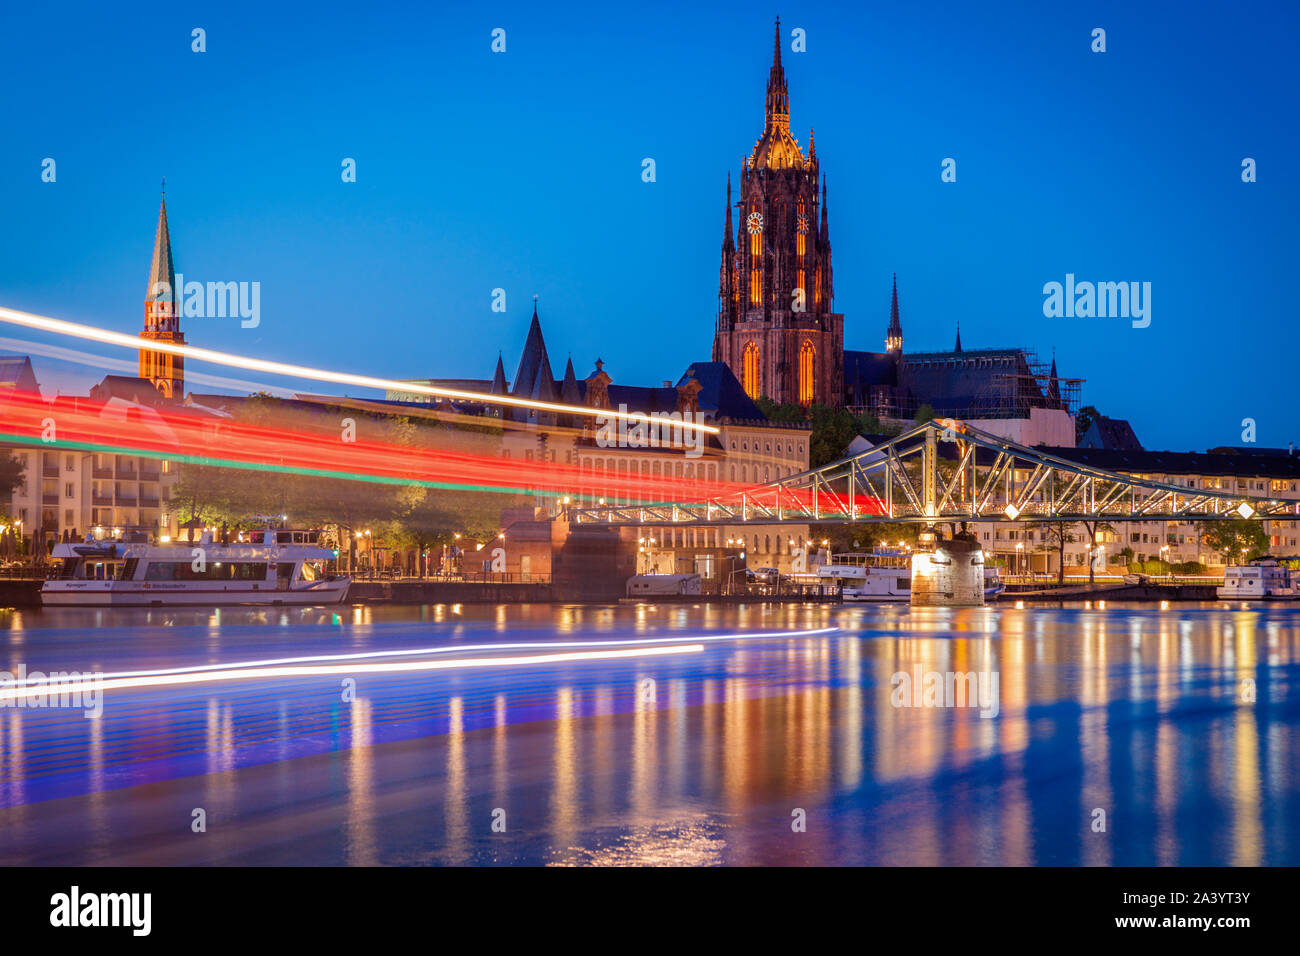 Light trails on river at sunset in Frankfurt, Germany Stock Photo